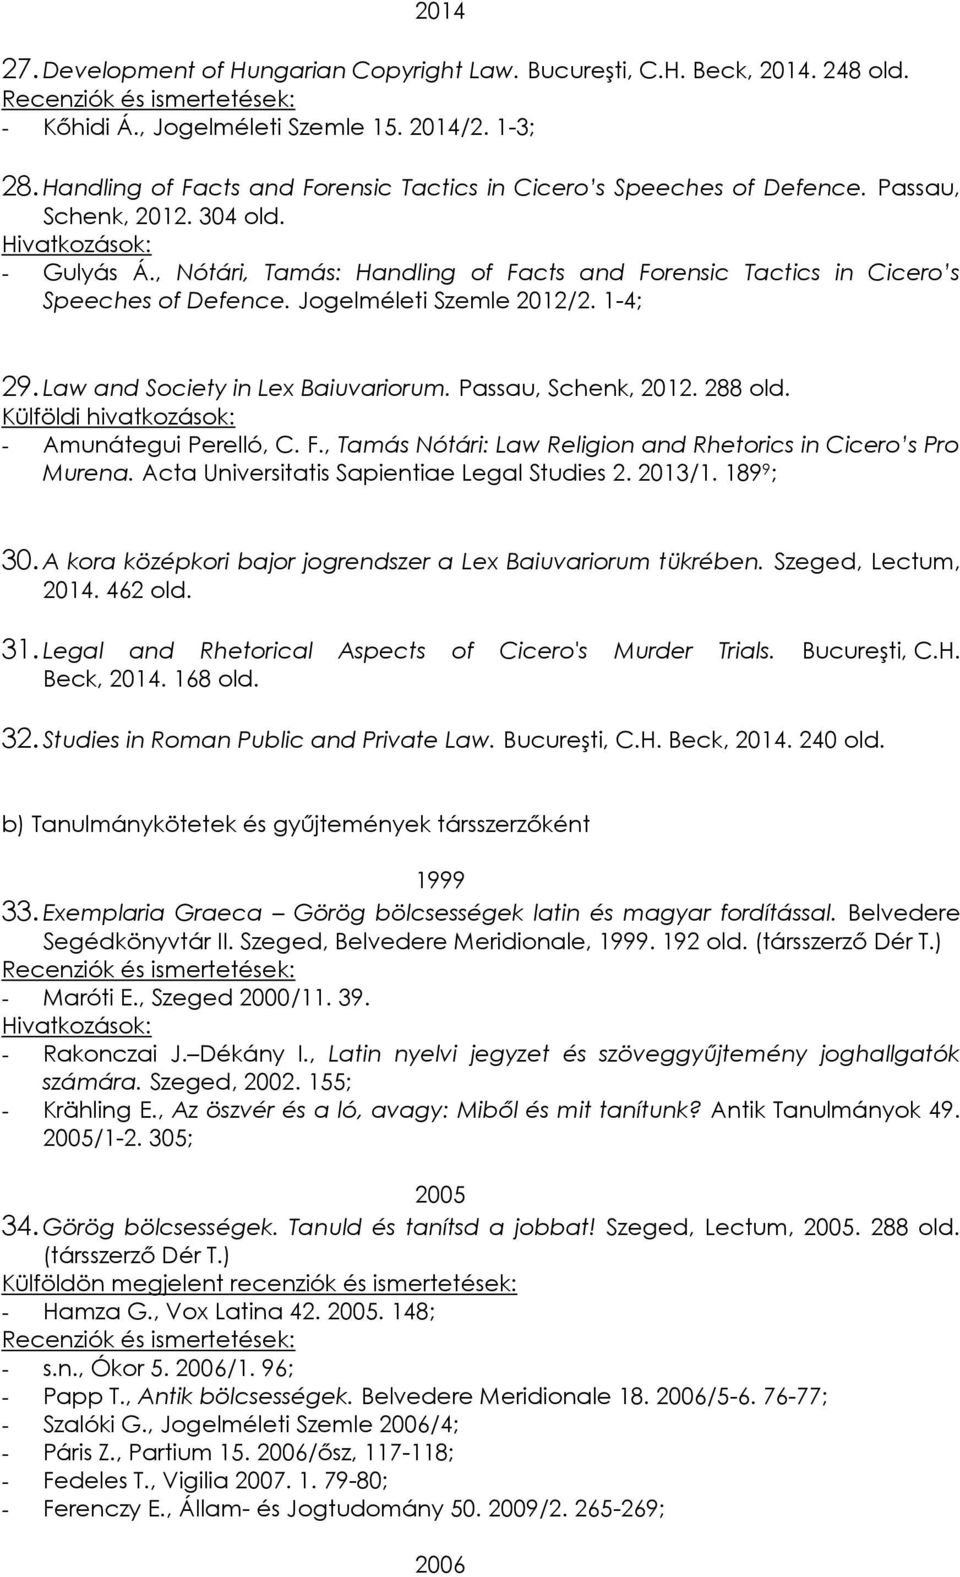 , Nótári, Tamás: Handling of Facts and Forensic Tactics in Cicero s Speeches of Defence. Jogelméleti Szemle 2012/2. 1-4; 29. Law and Society in Lex Baiuvariorum. Passau, Schenk, 2012. 288 old.